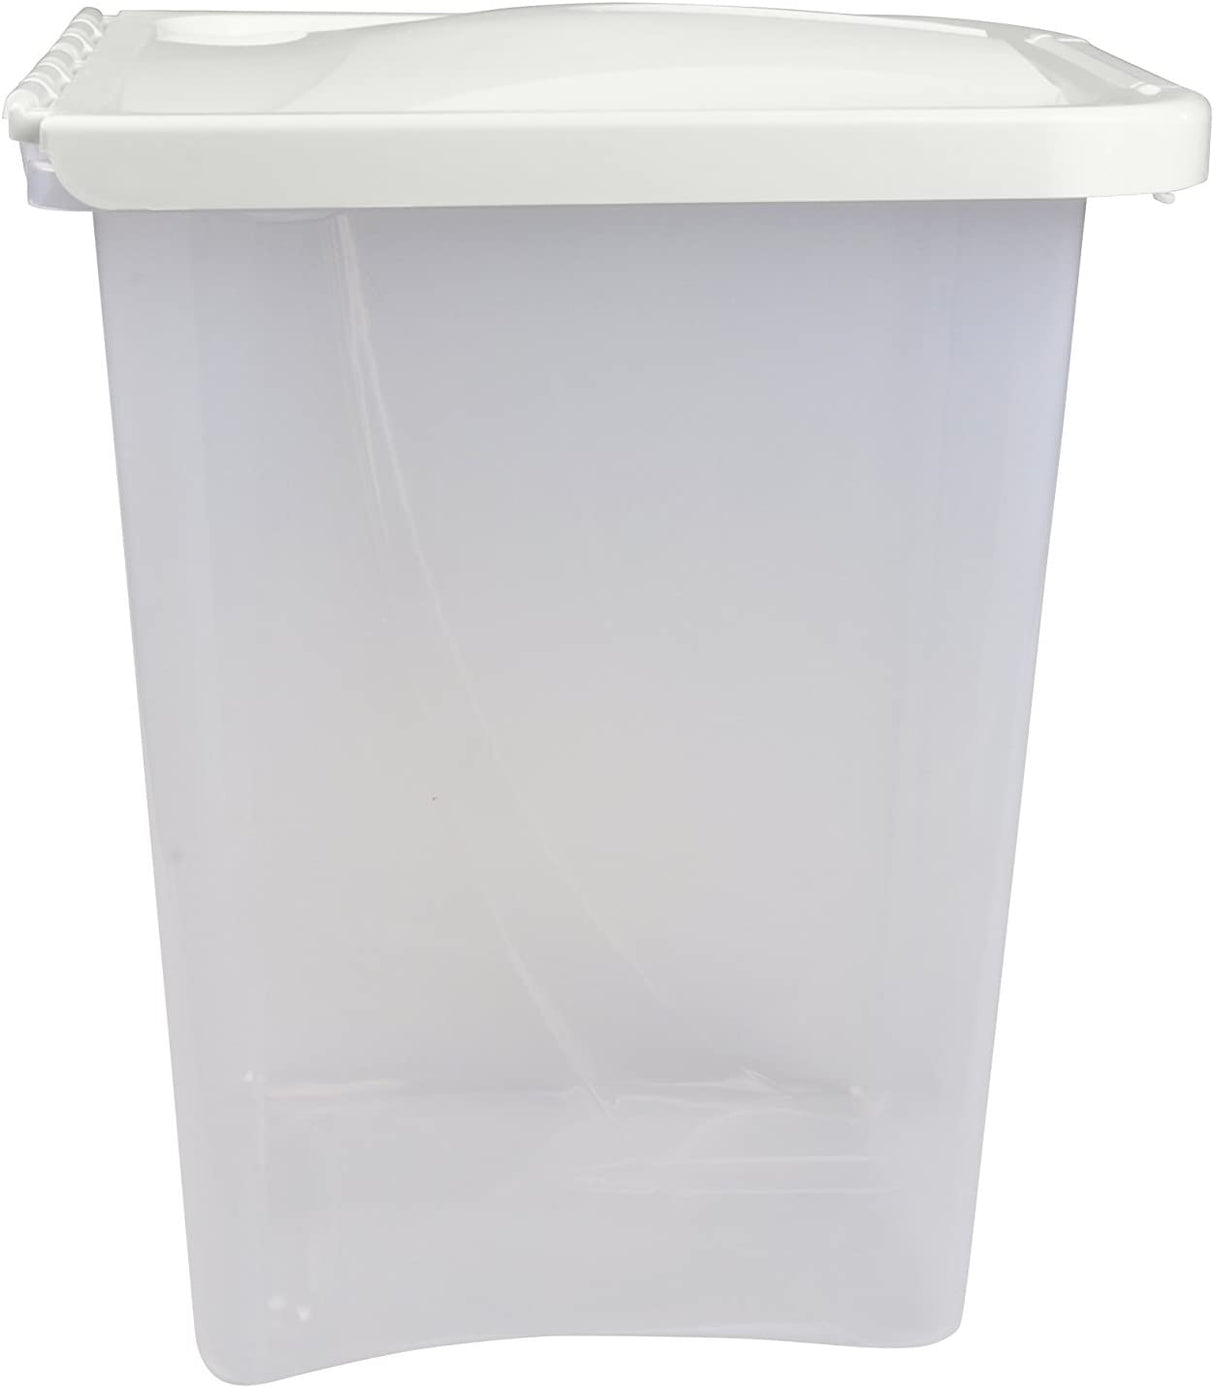 Van Ness Pet Food Container for Dogs, Cats, Birds and Small Animals - PetMountain.com